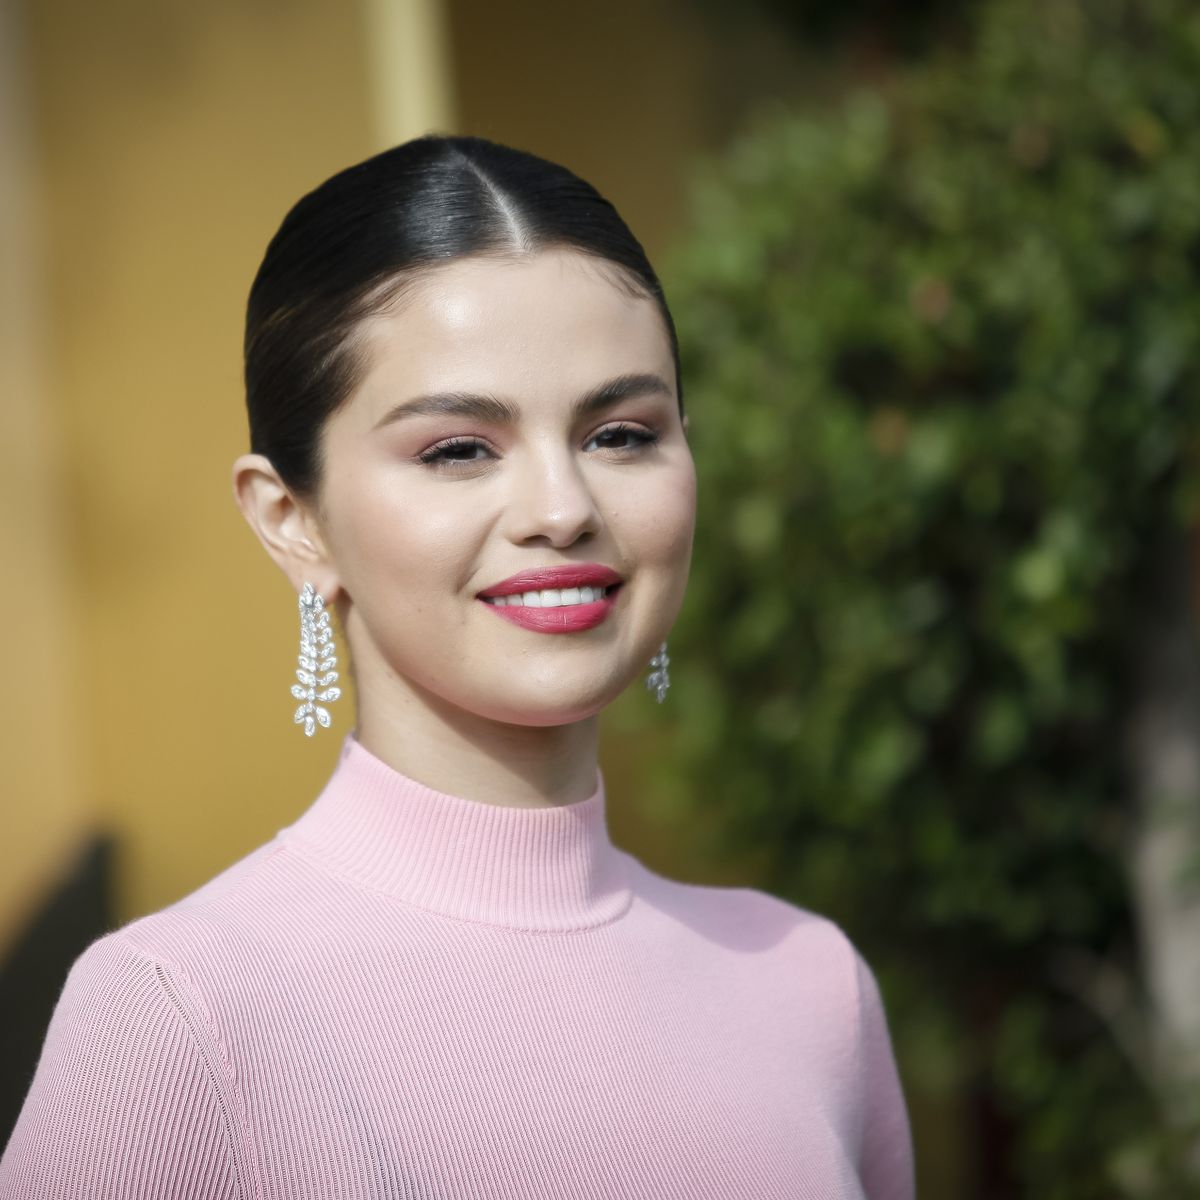 Selena Gomez Anal Porn Captions - Selena Gomez On Ageing And Finding Happiness